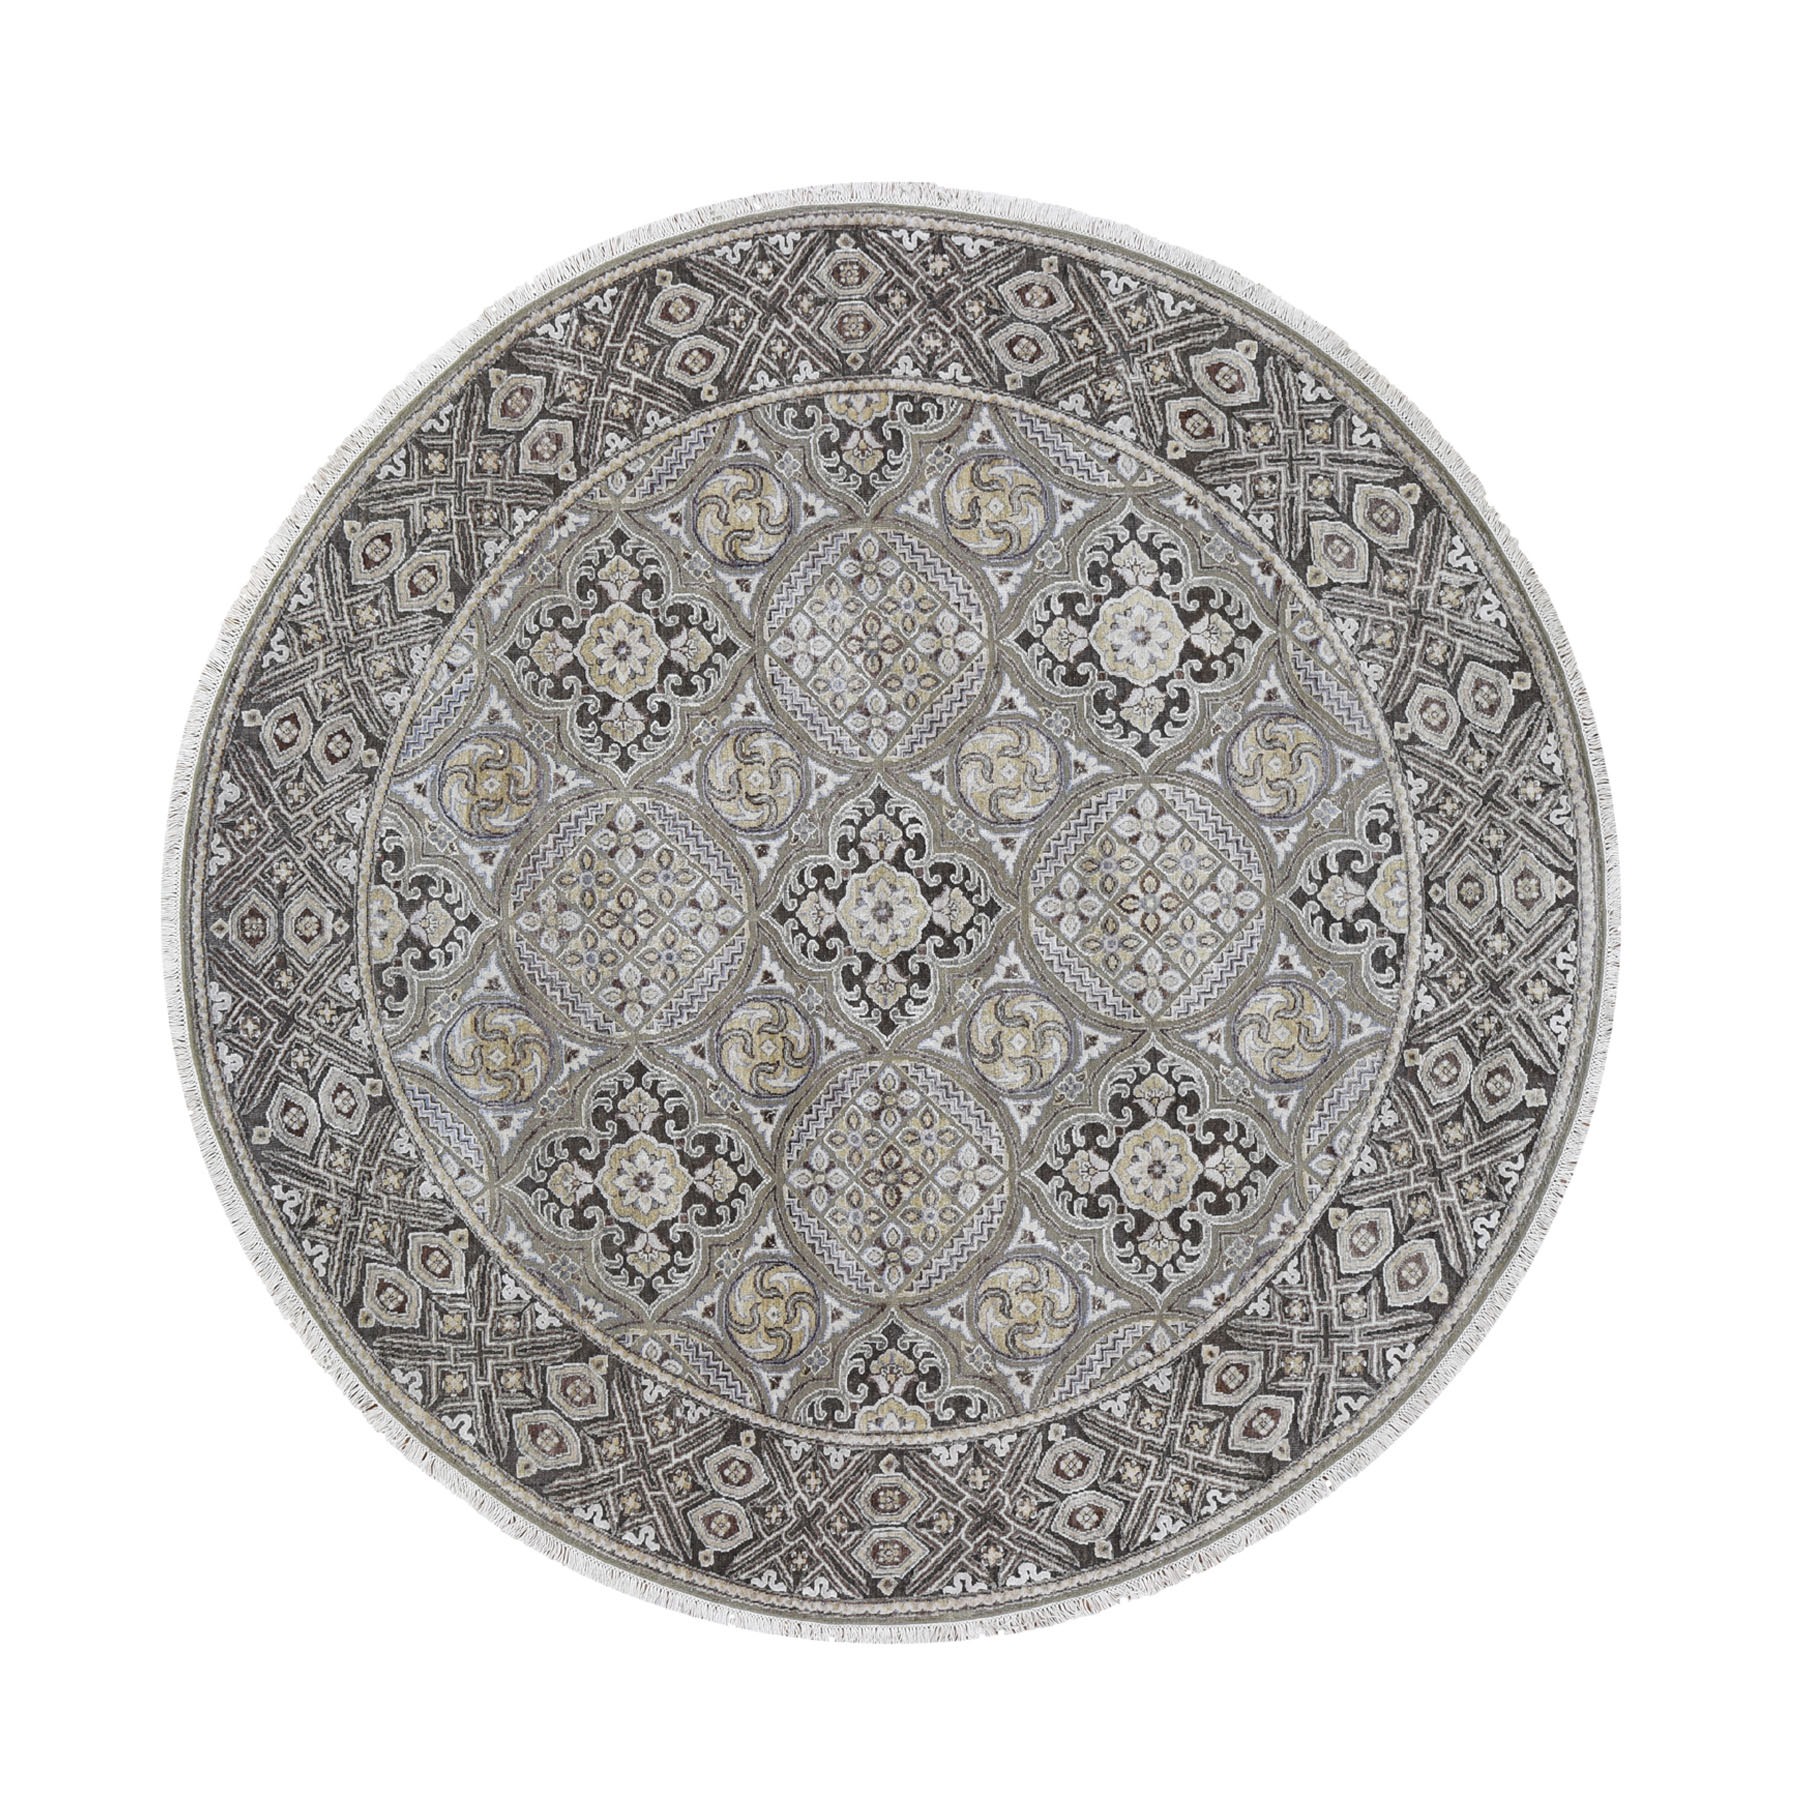 10'X10' Textured Wool And Silk Mughal Inspired Medallions Round Hand-Knotted Oriental Rug moad69ca